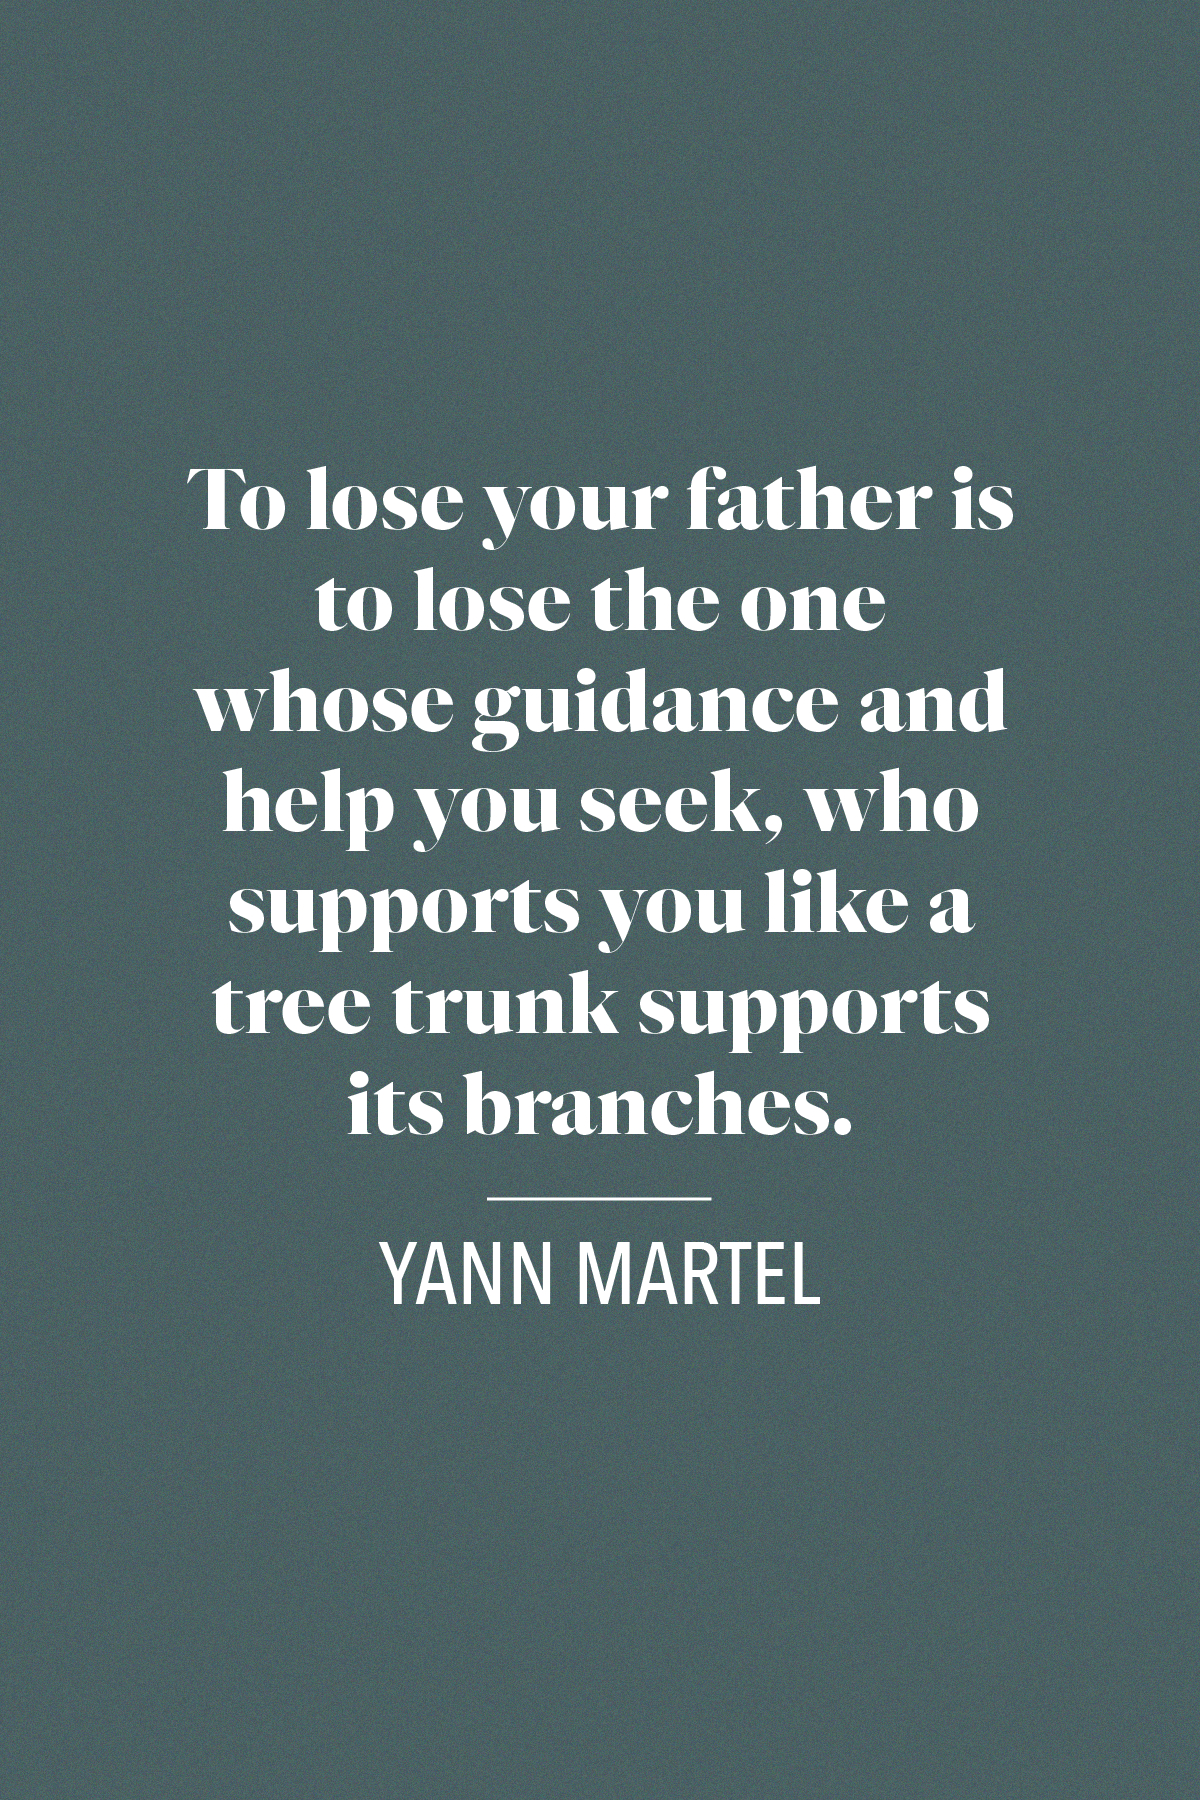 38 Sympathetic Quotes About Loss Of Father